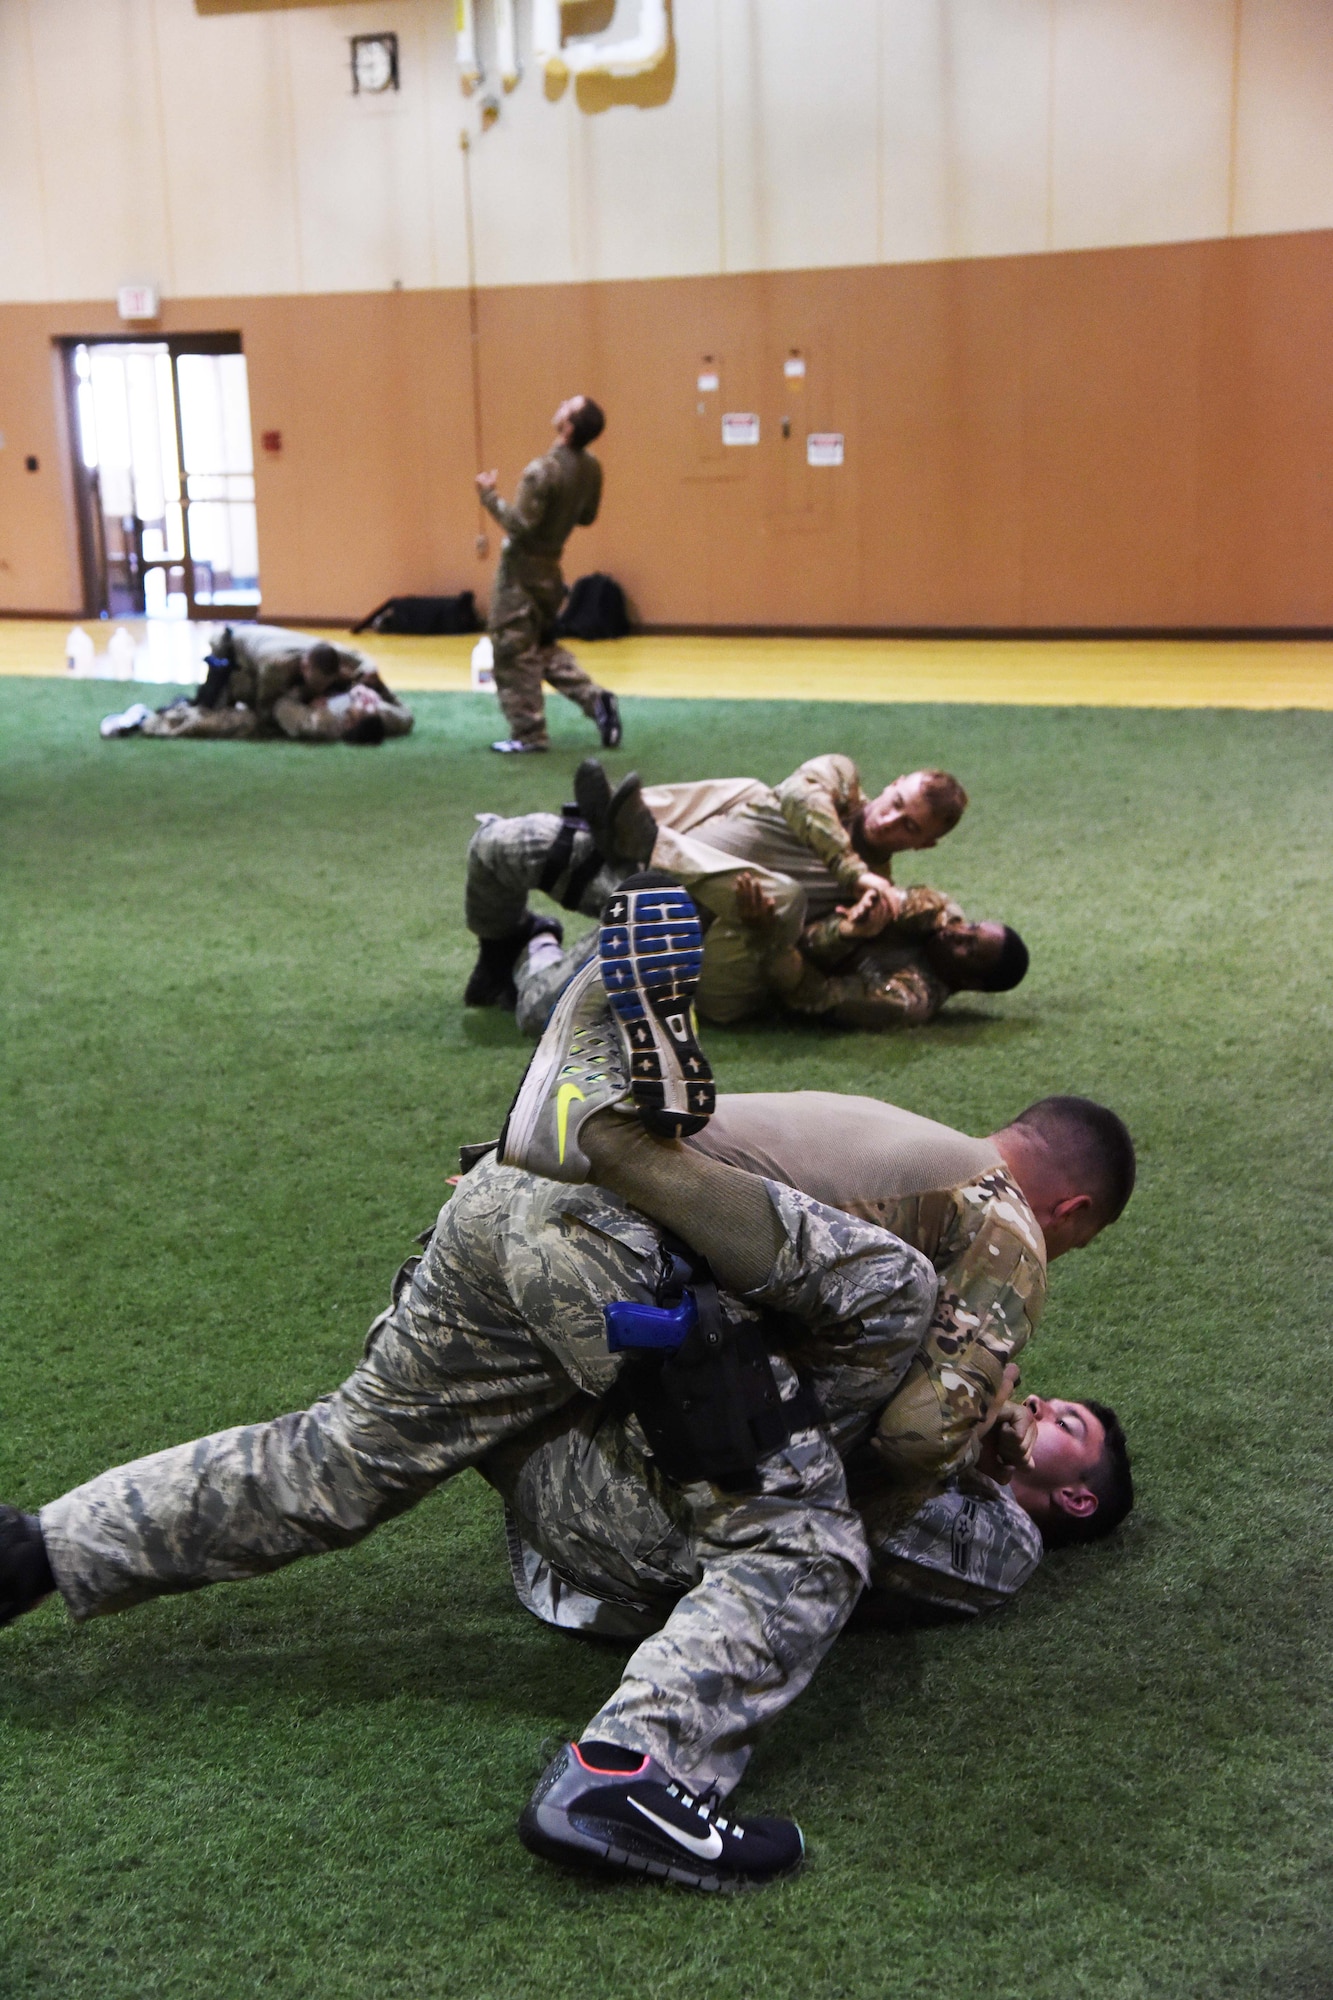 Members of the 341st Security Forces Group at Malmstrom Air Force Base spar during a Combatives Instructor Course at the base’s fitness center June 30. The course focuses on weapons retention, suspect control and challenge techniques, and close-quarter hand-to-hand combative technique. (U.S. Air Force photo/Airman 1st Class Collin Schmidt)